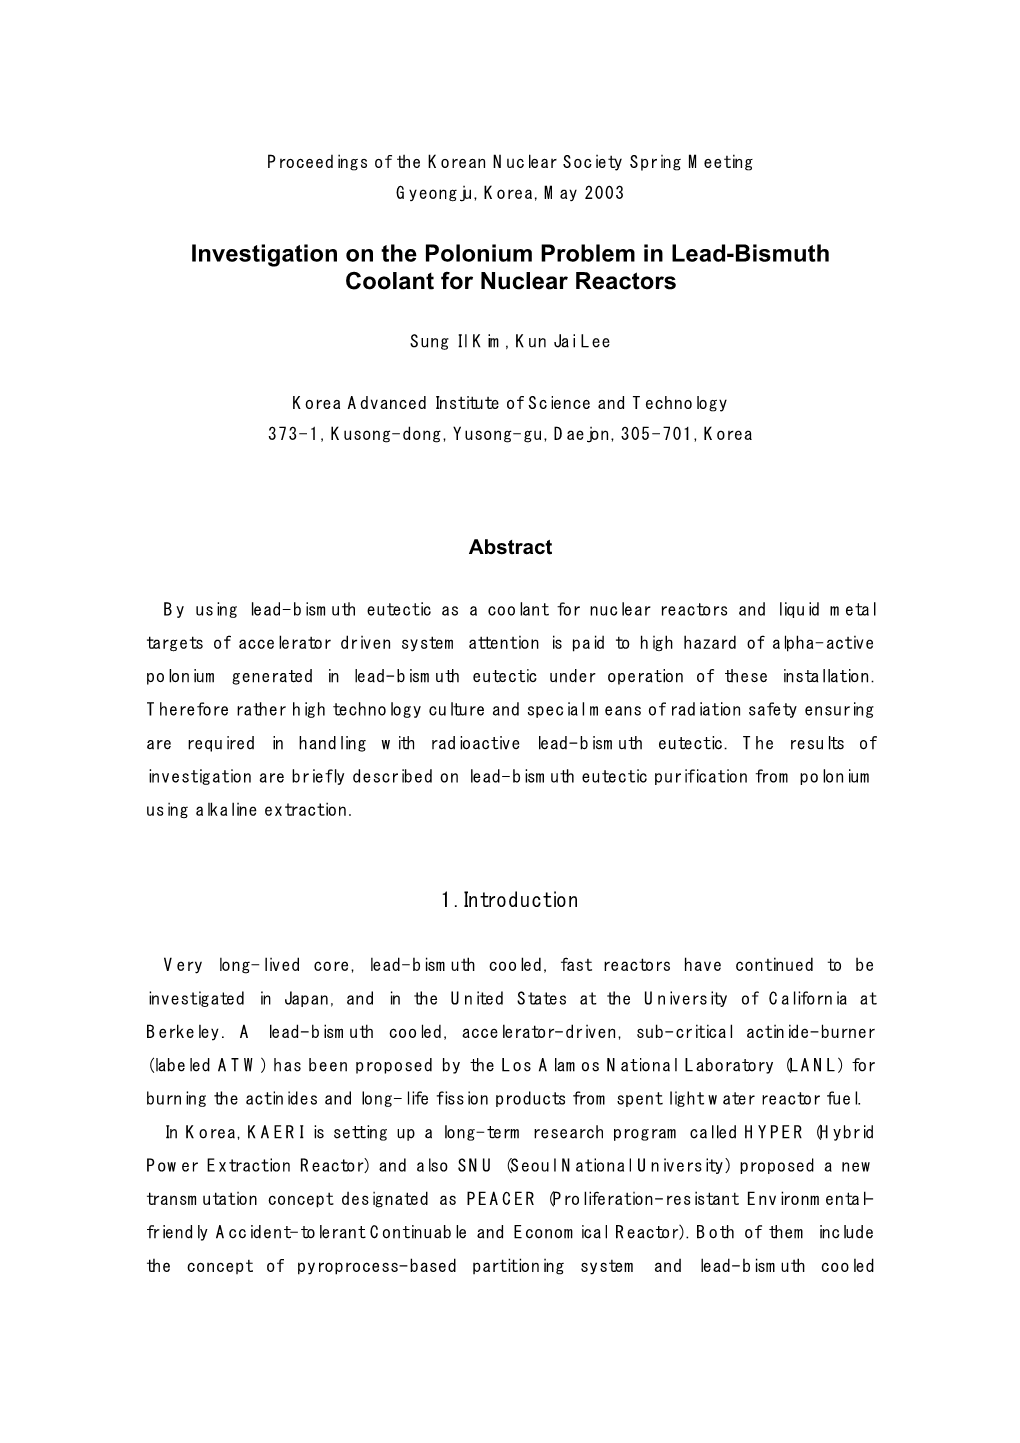 Investigation on the Polonium Problem in Lead-Bismuth Coolant for Nuclear Reactors